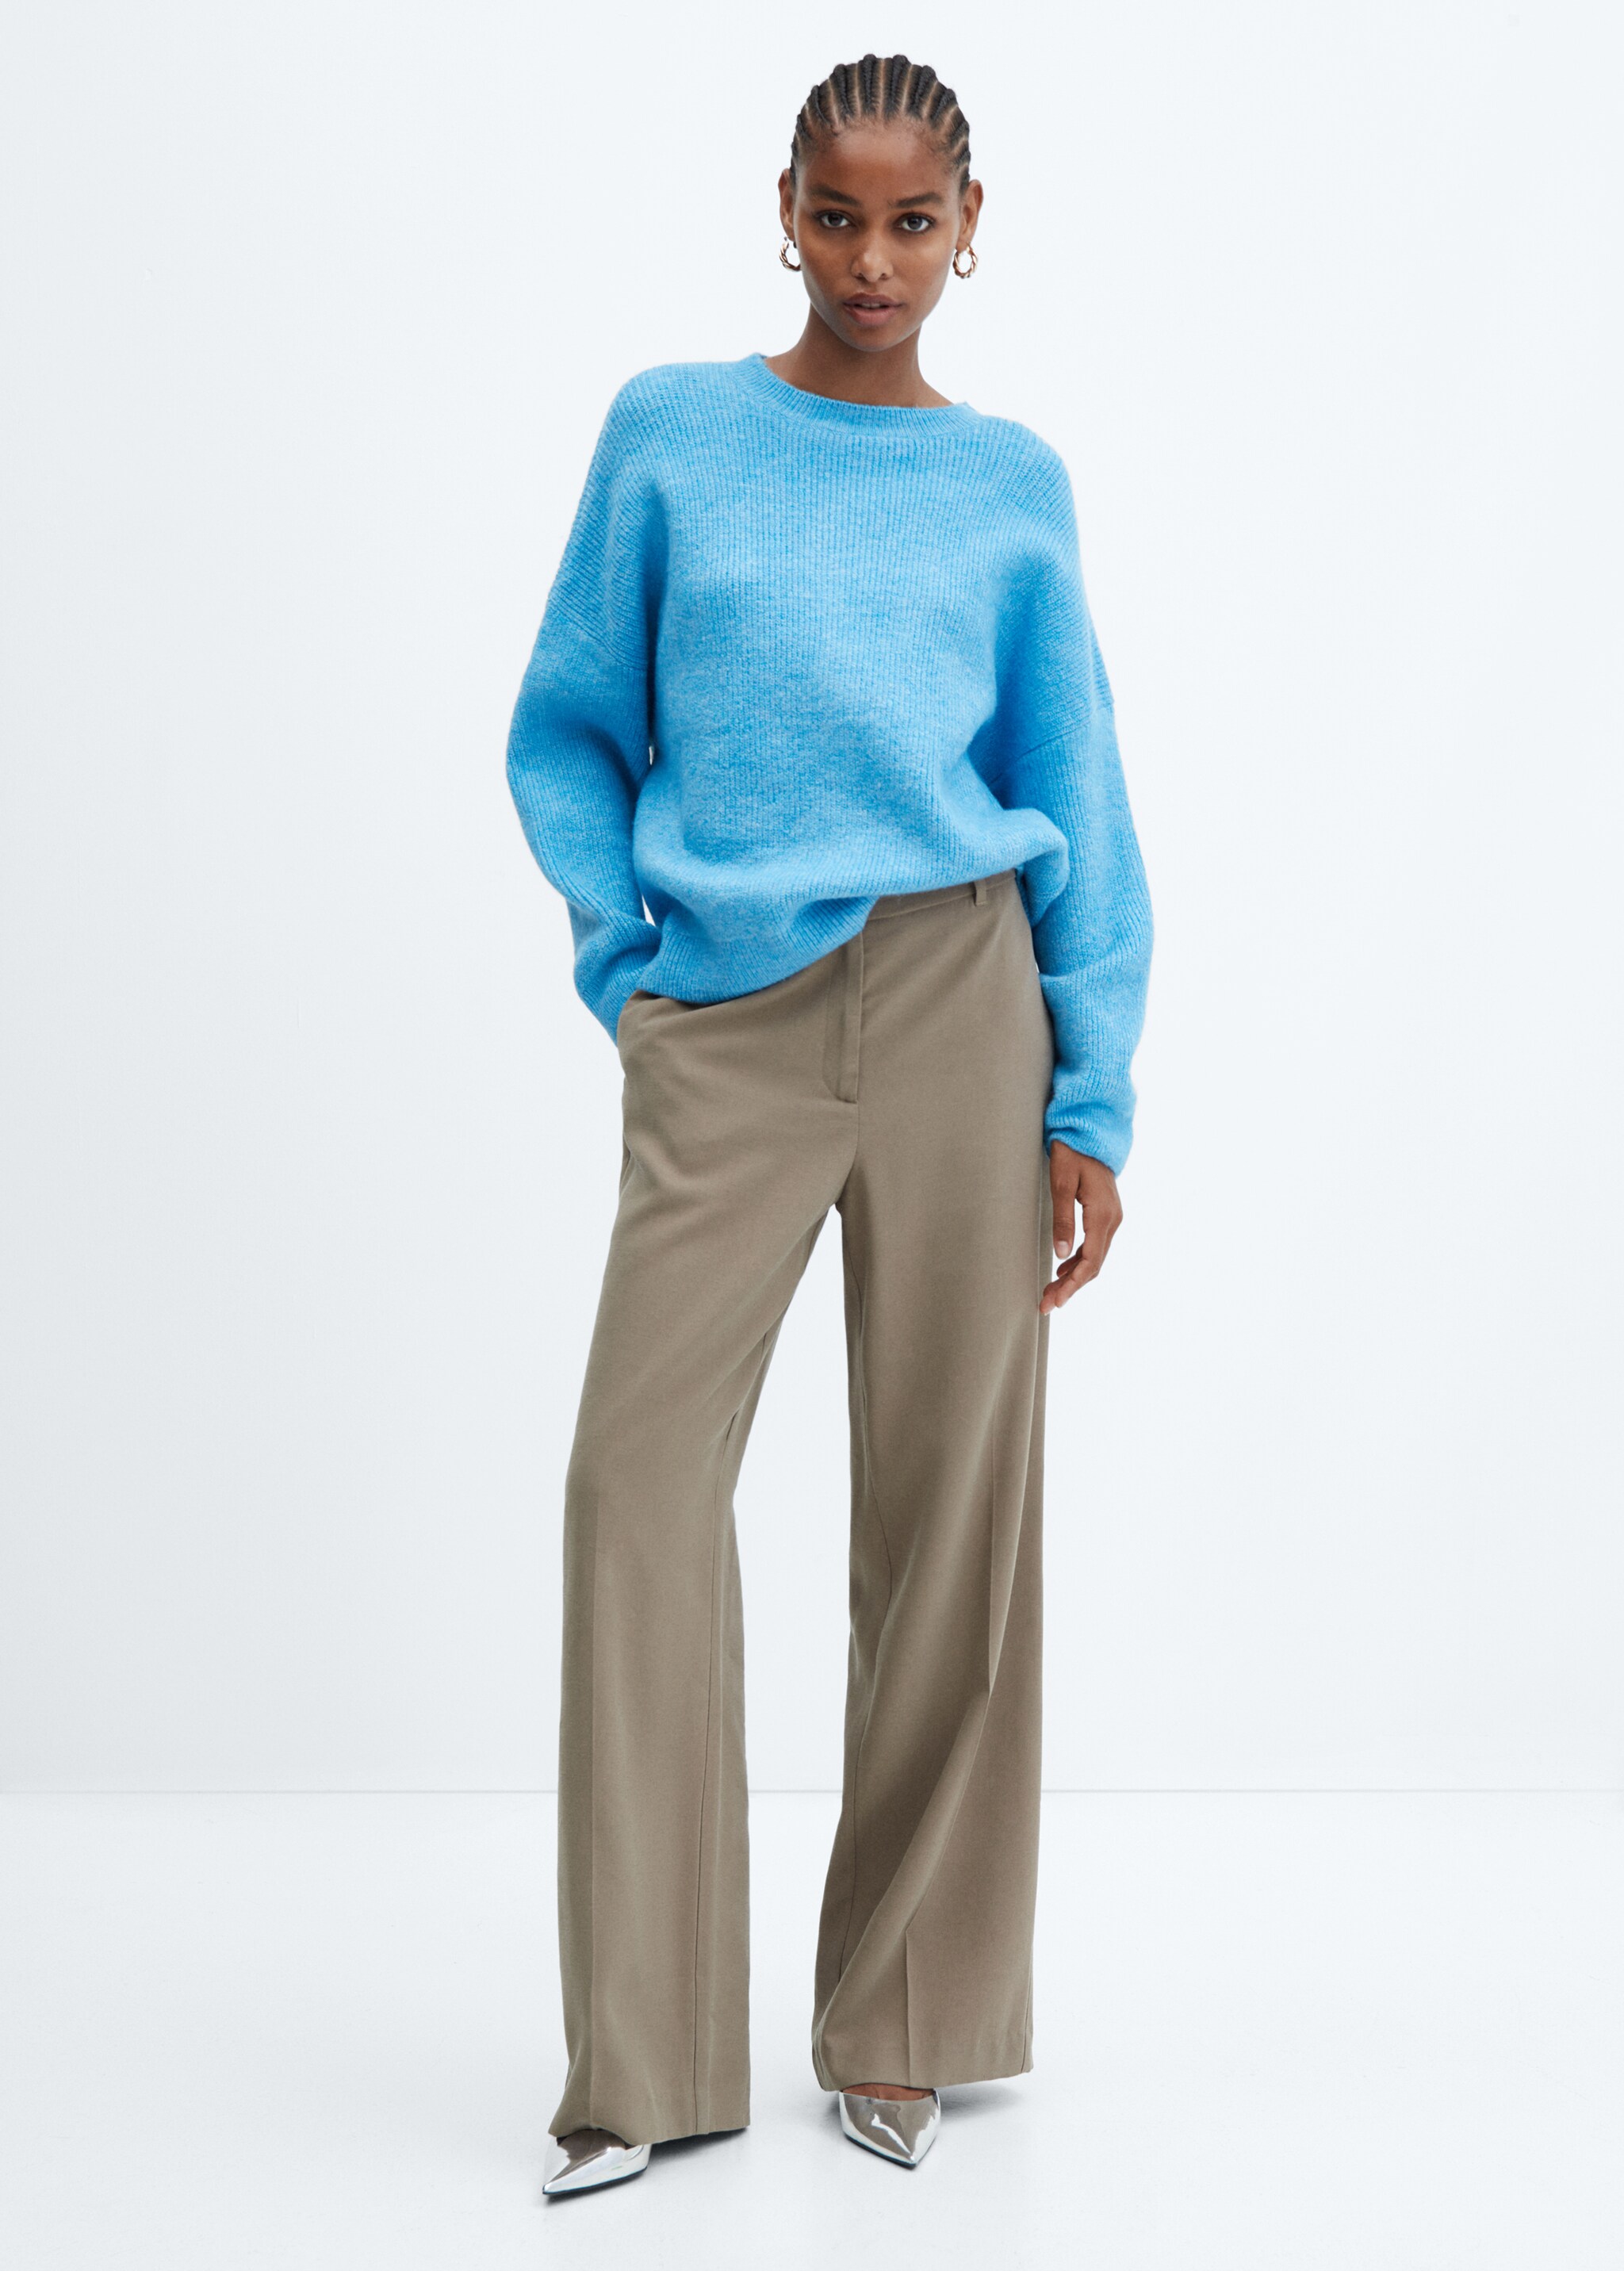 Oversized sweater with dropped shoulders - General plane